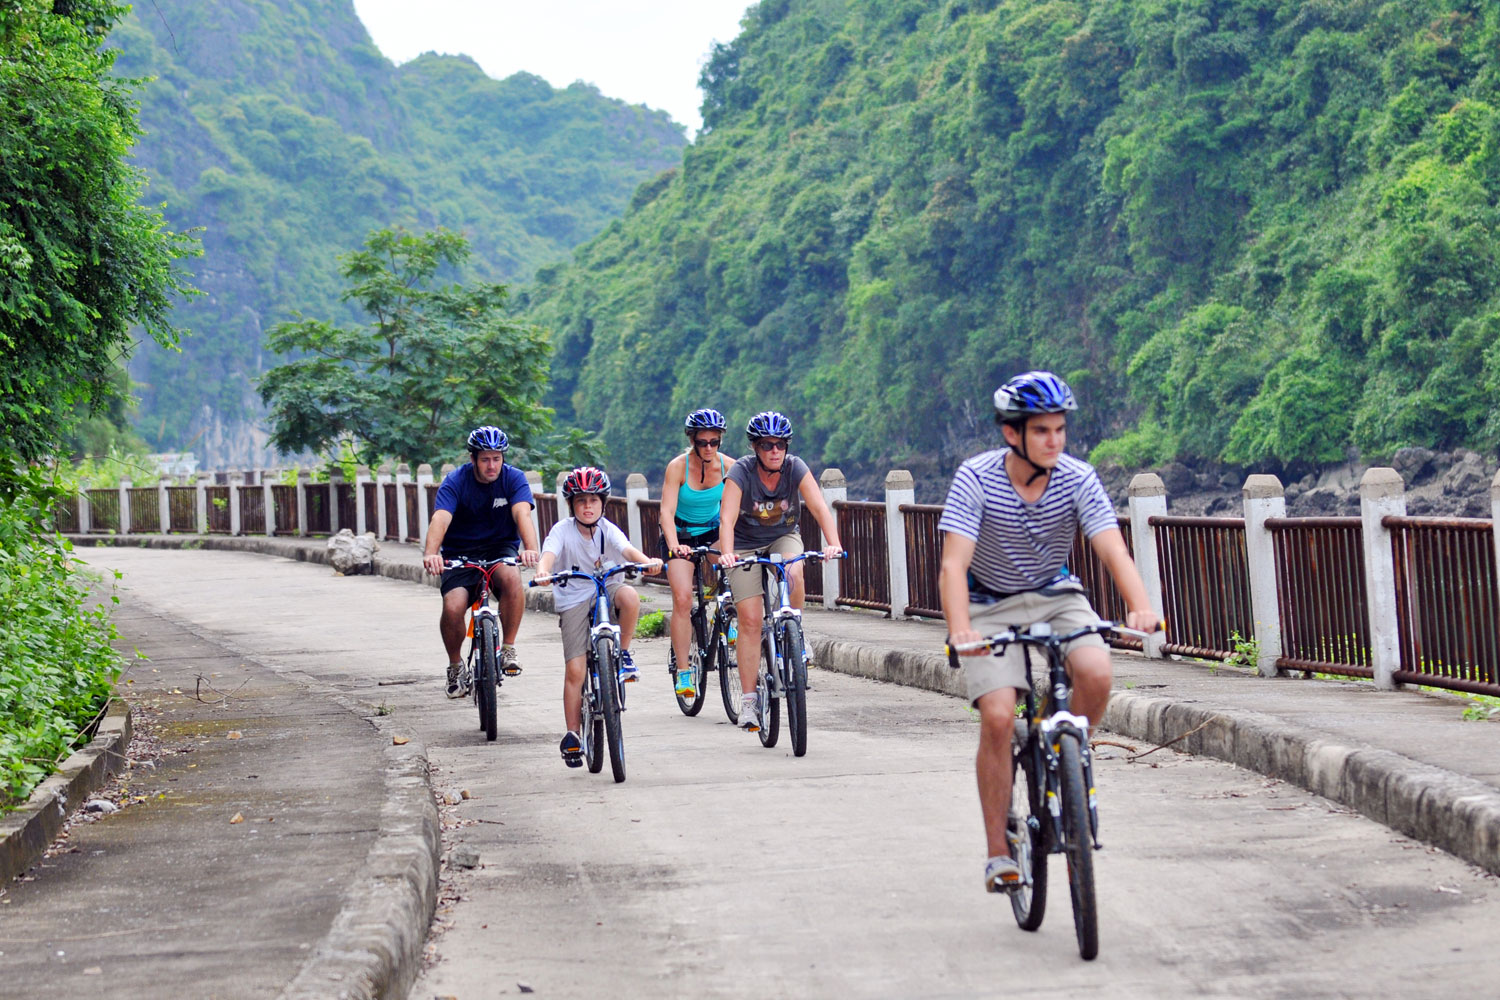 Cycling on the beach of Halong Bay (photo from halongcruisevietnam.com)